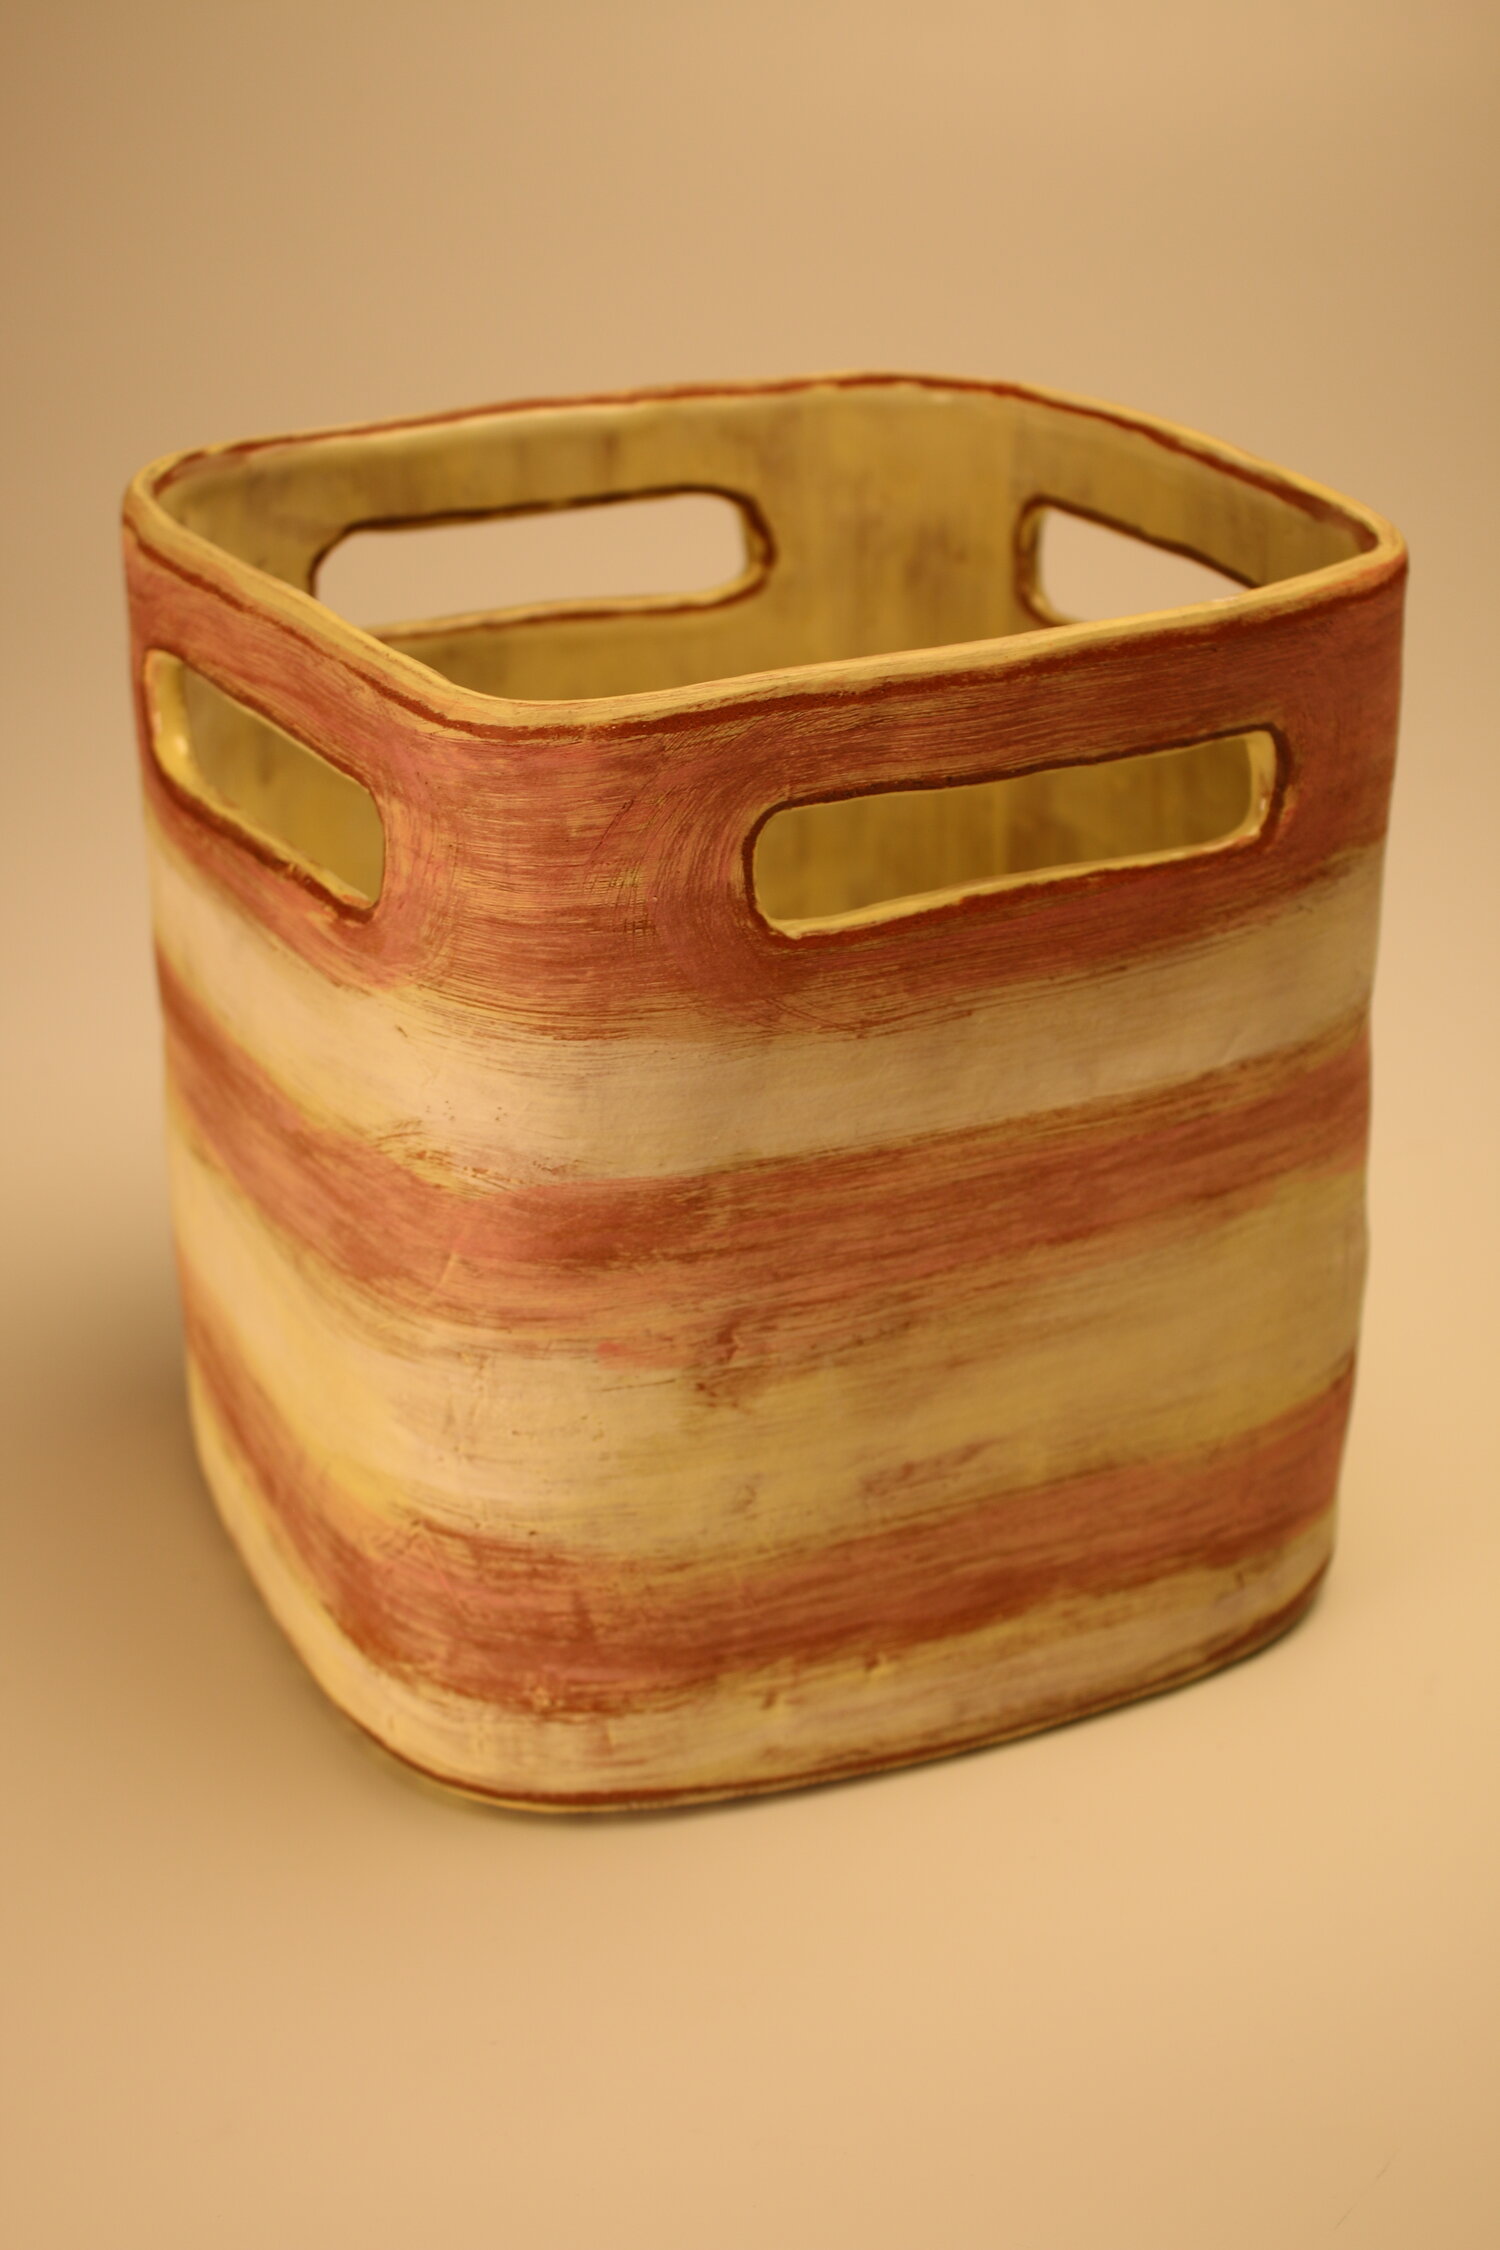 Square shaped yellow and brown deep ceramic bucket, image courtesy of the artist